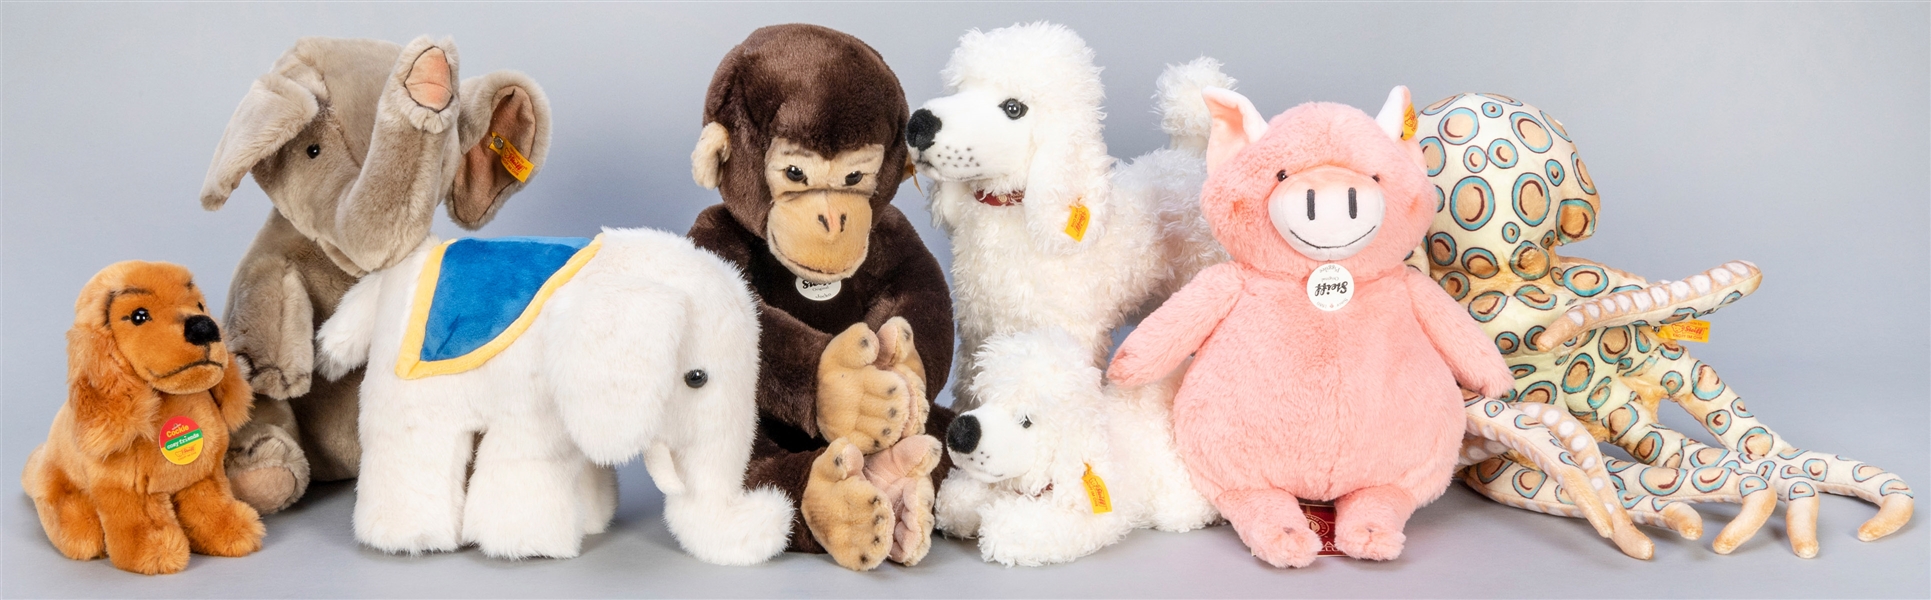  Group of 8 Steiff Plush Dogs, Elephants, and Other Animals....